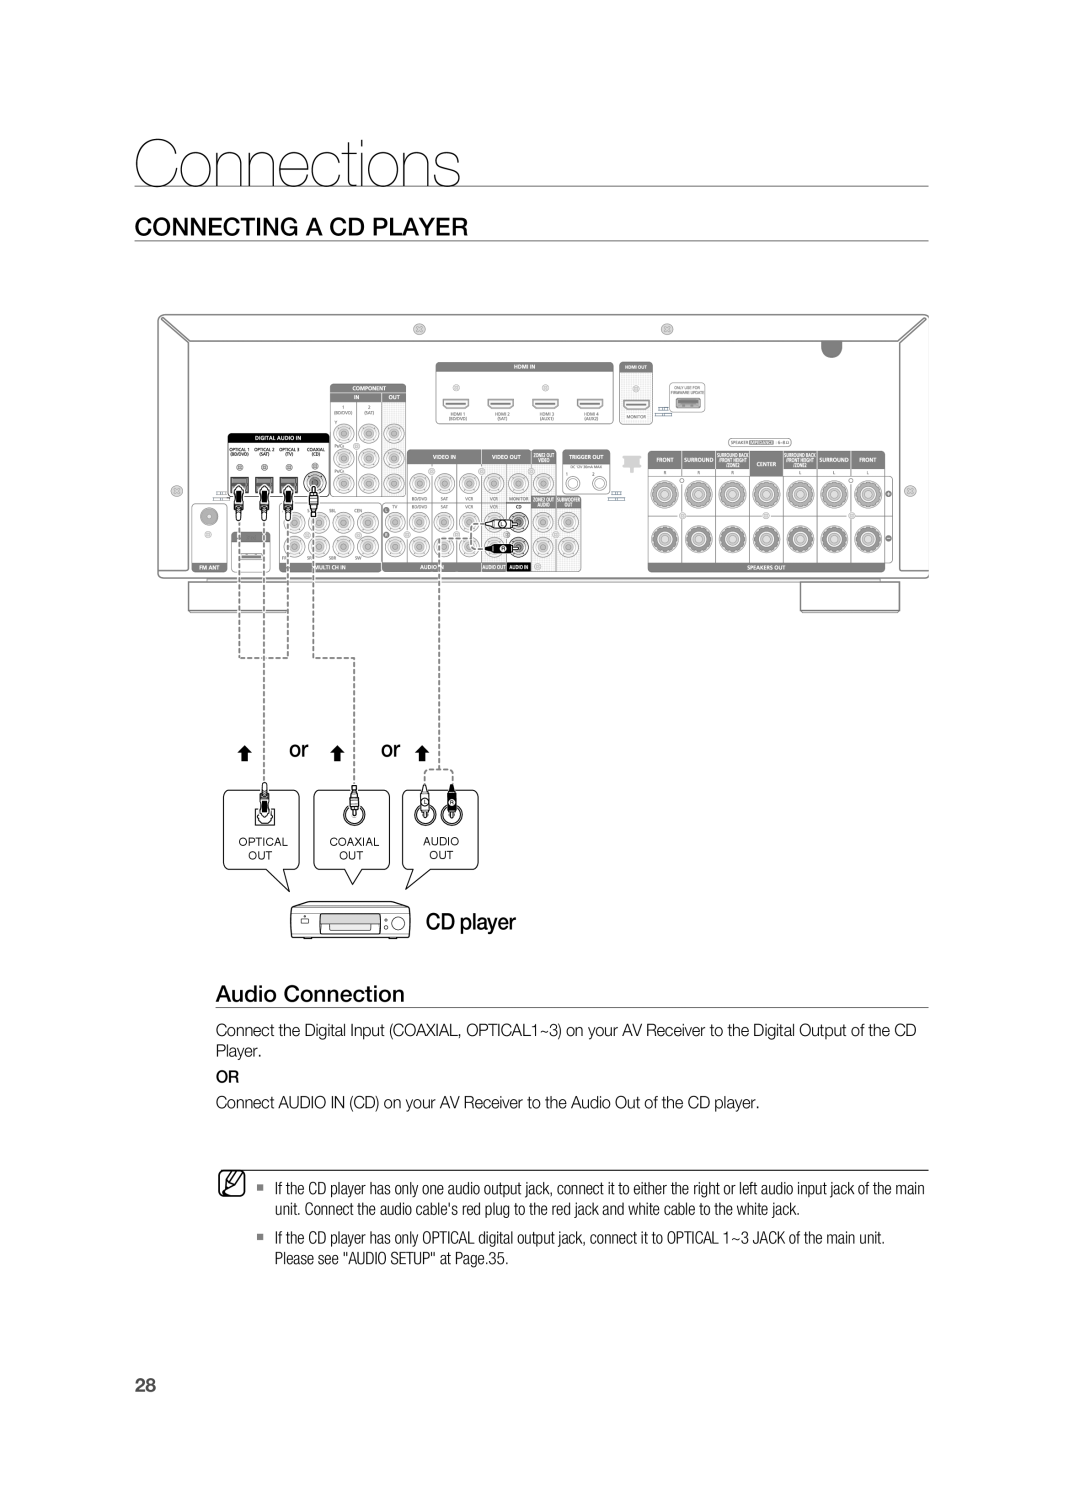 Samsung HW-C900-XAA user manual Connections, Connecting A Cd Player, CD player Audio Connection 